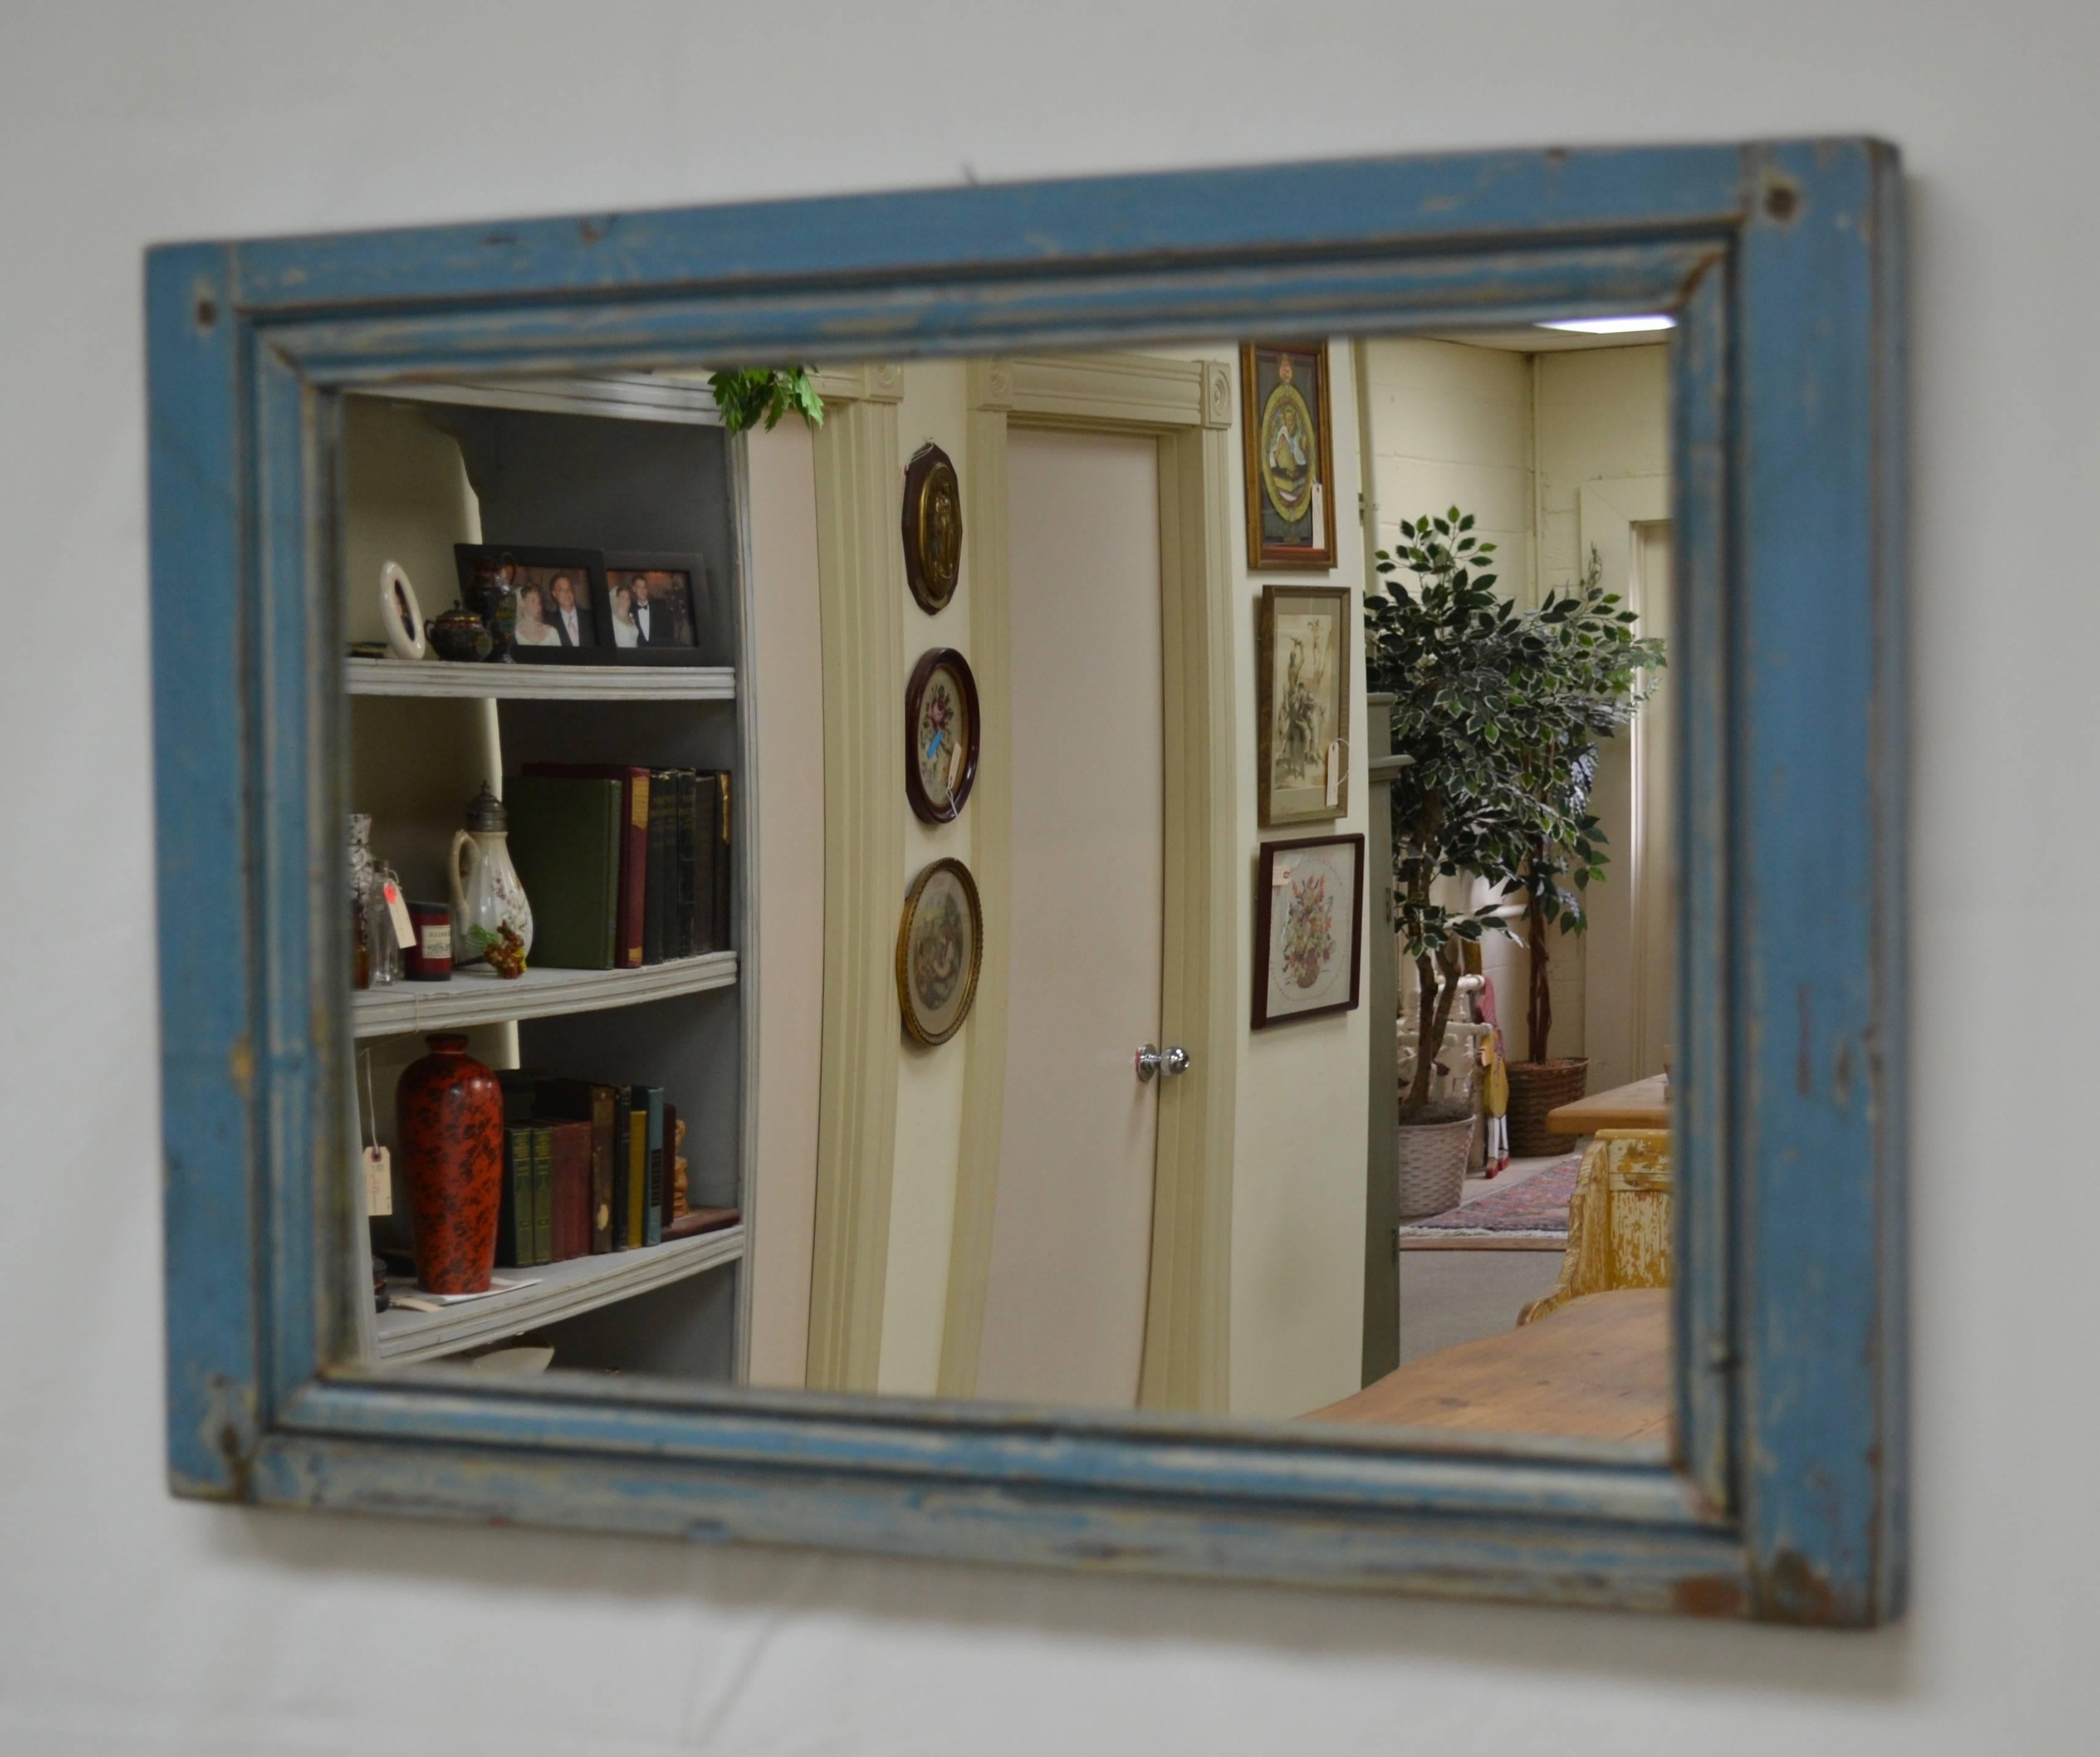 A 19th century pine paneled room in France has yielded a number of small frames in layers of old paint. These are rubbed down and sealed and fitted with new glass to create some interesting and attractive wall mirrors. These are great for a powder